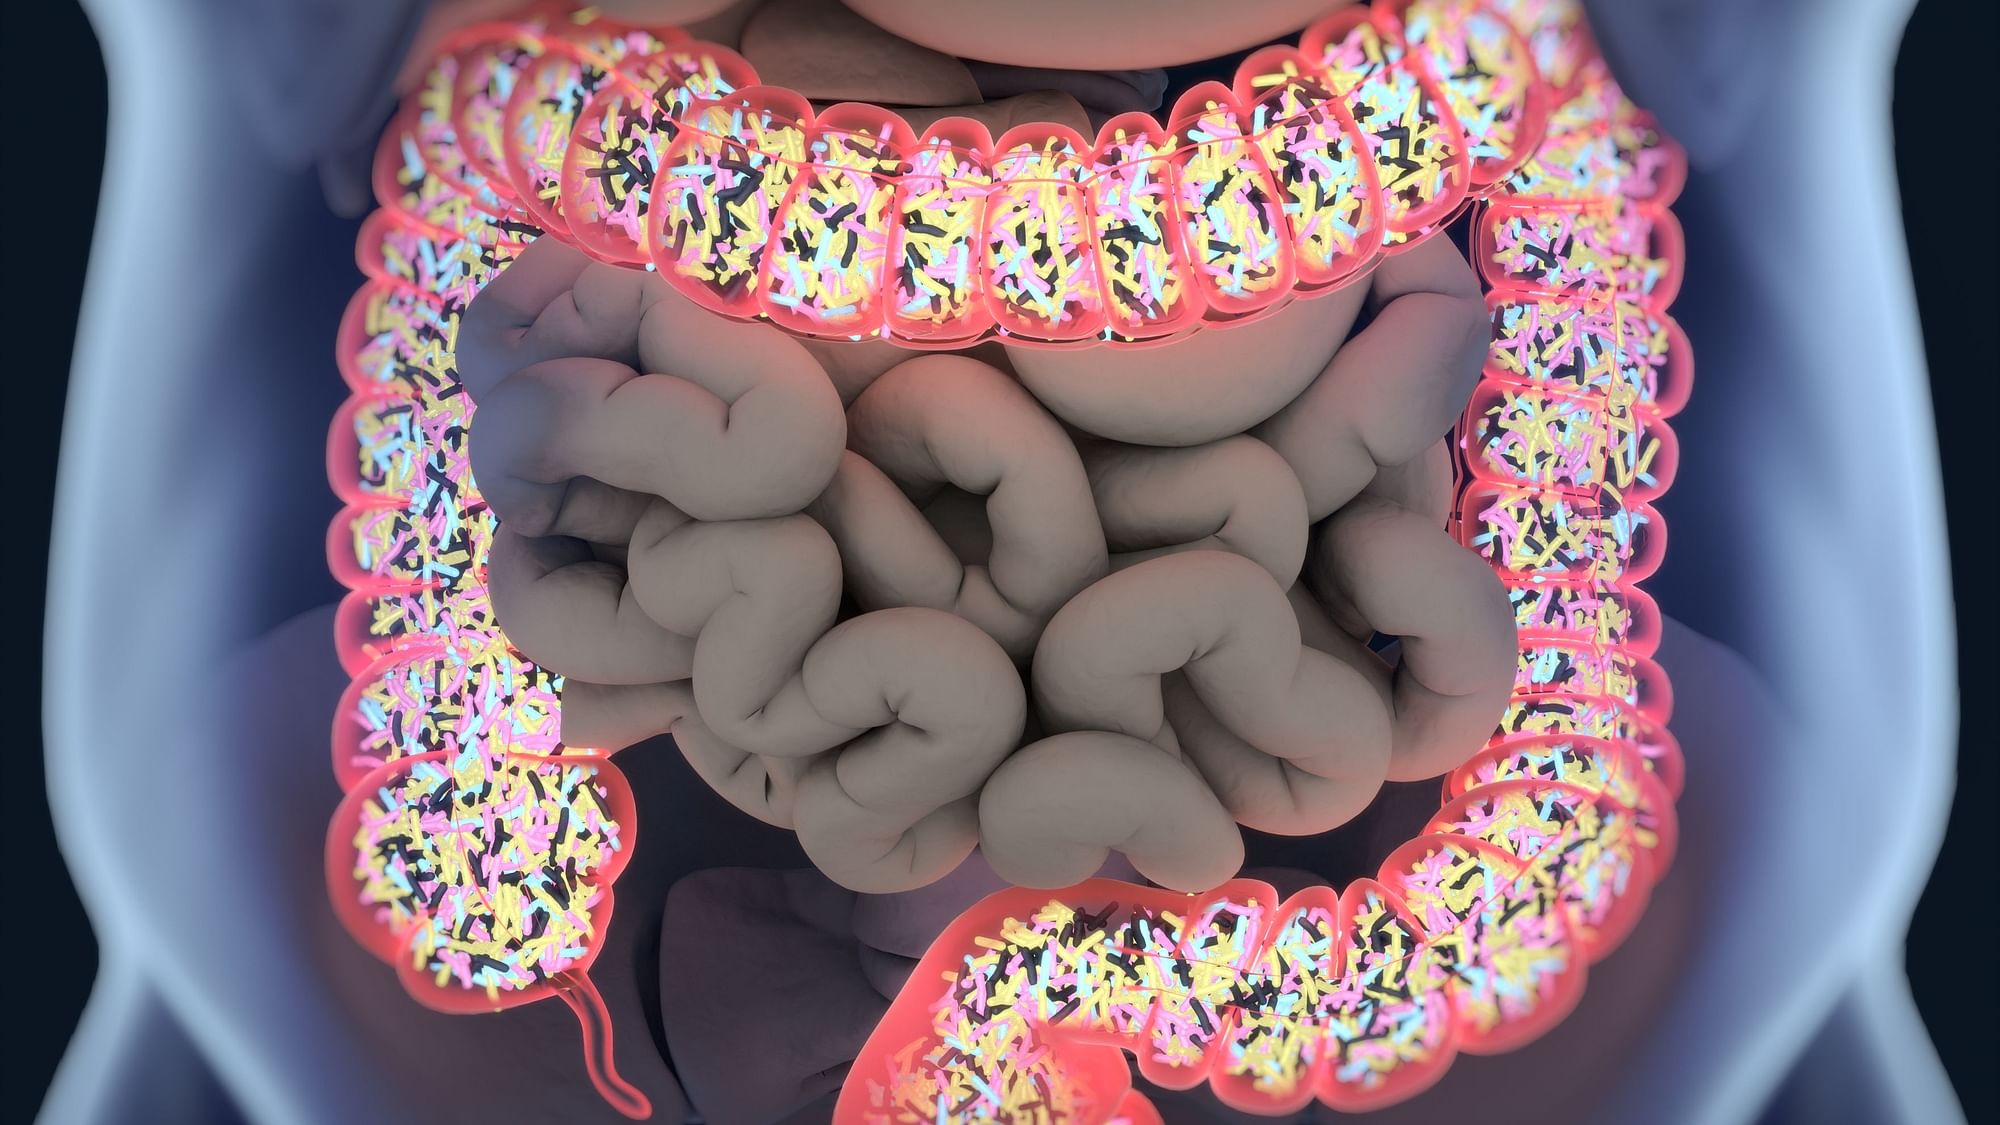 There may be a link between your gut microbes and mental health.